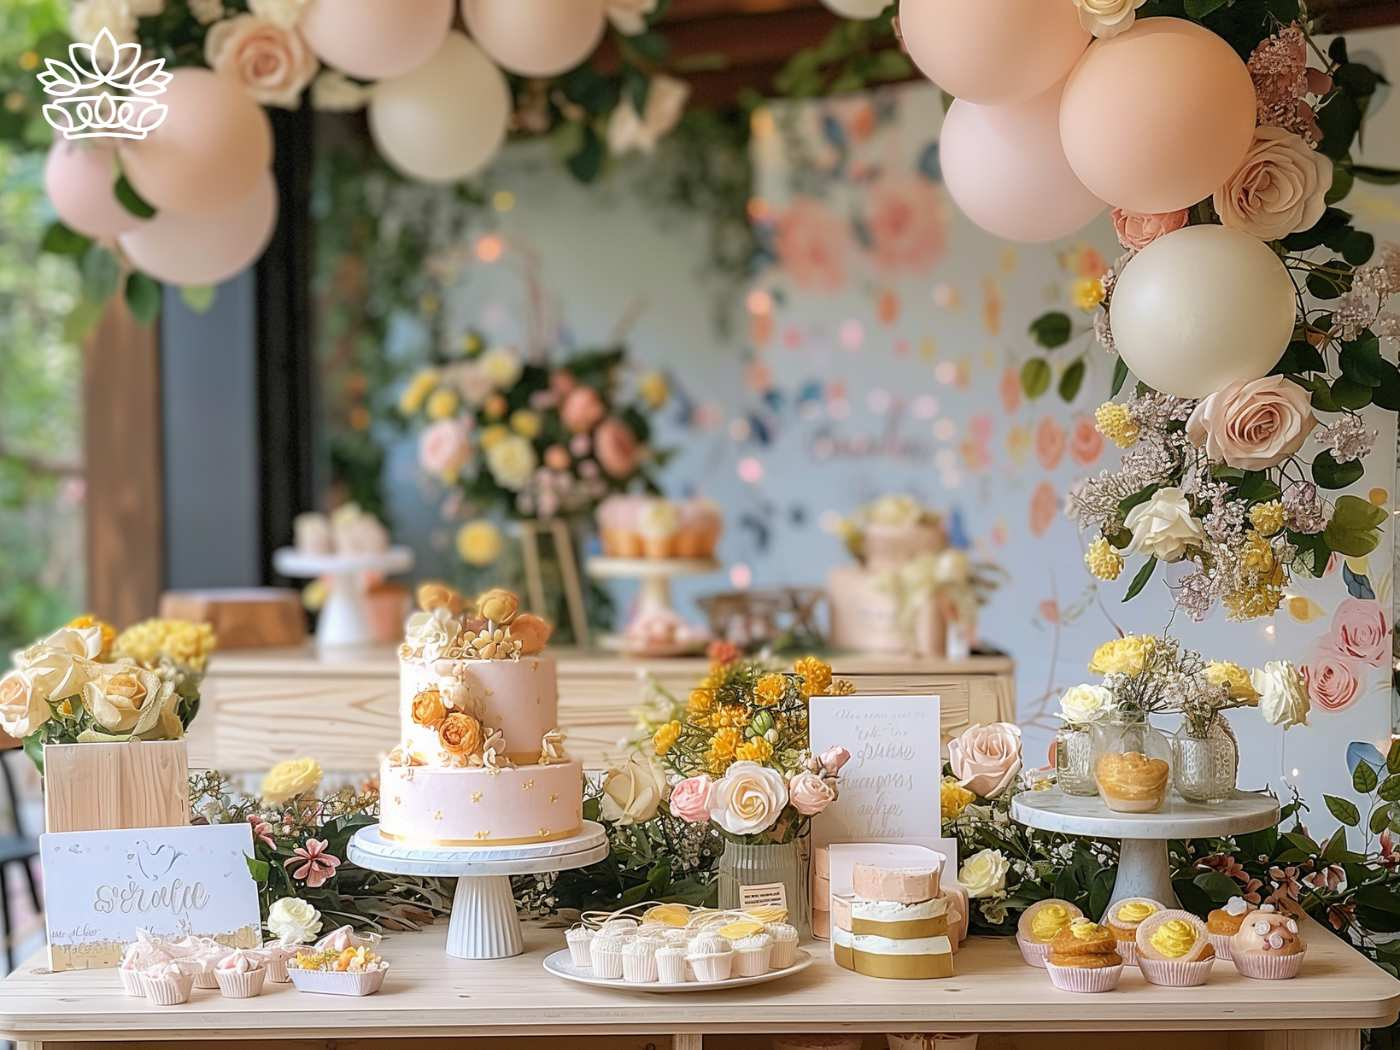 Elegant dessert table adorned with a tiered cake, assorted pastries, and a bountiful floral arrangement, enhanced by balloon decorations for Fabulous Flowers and Gifts.